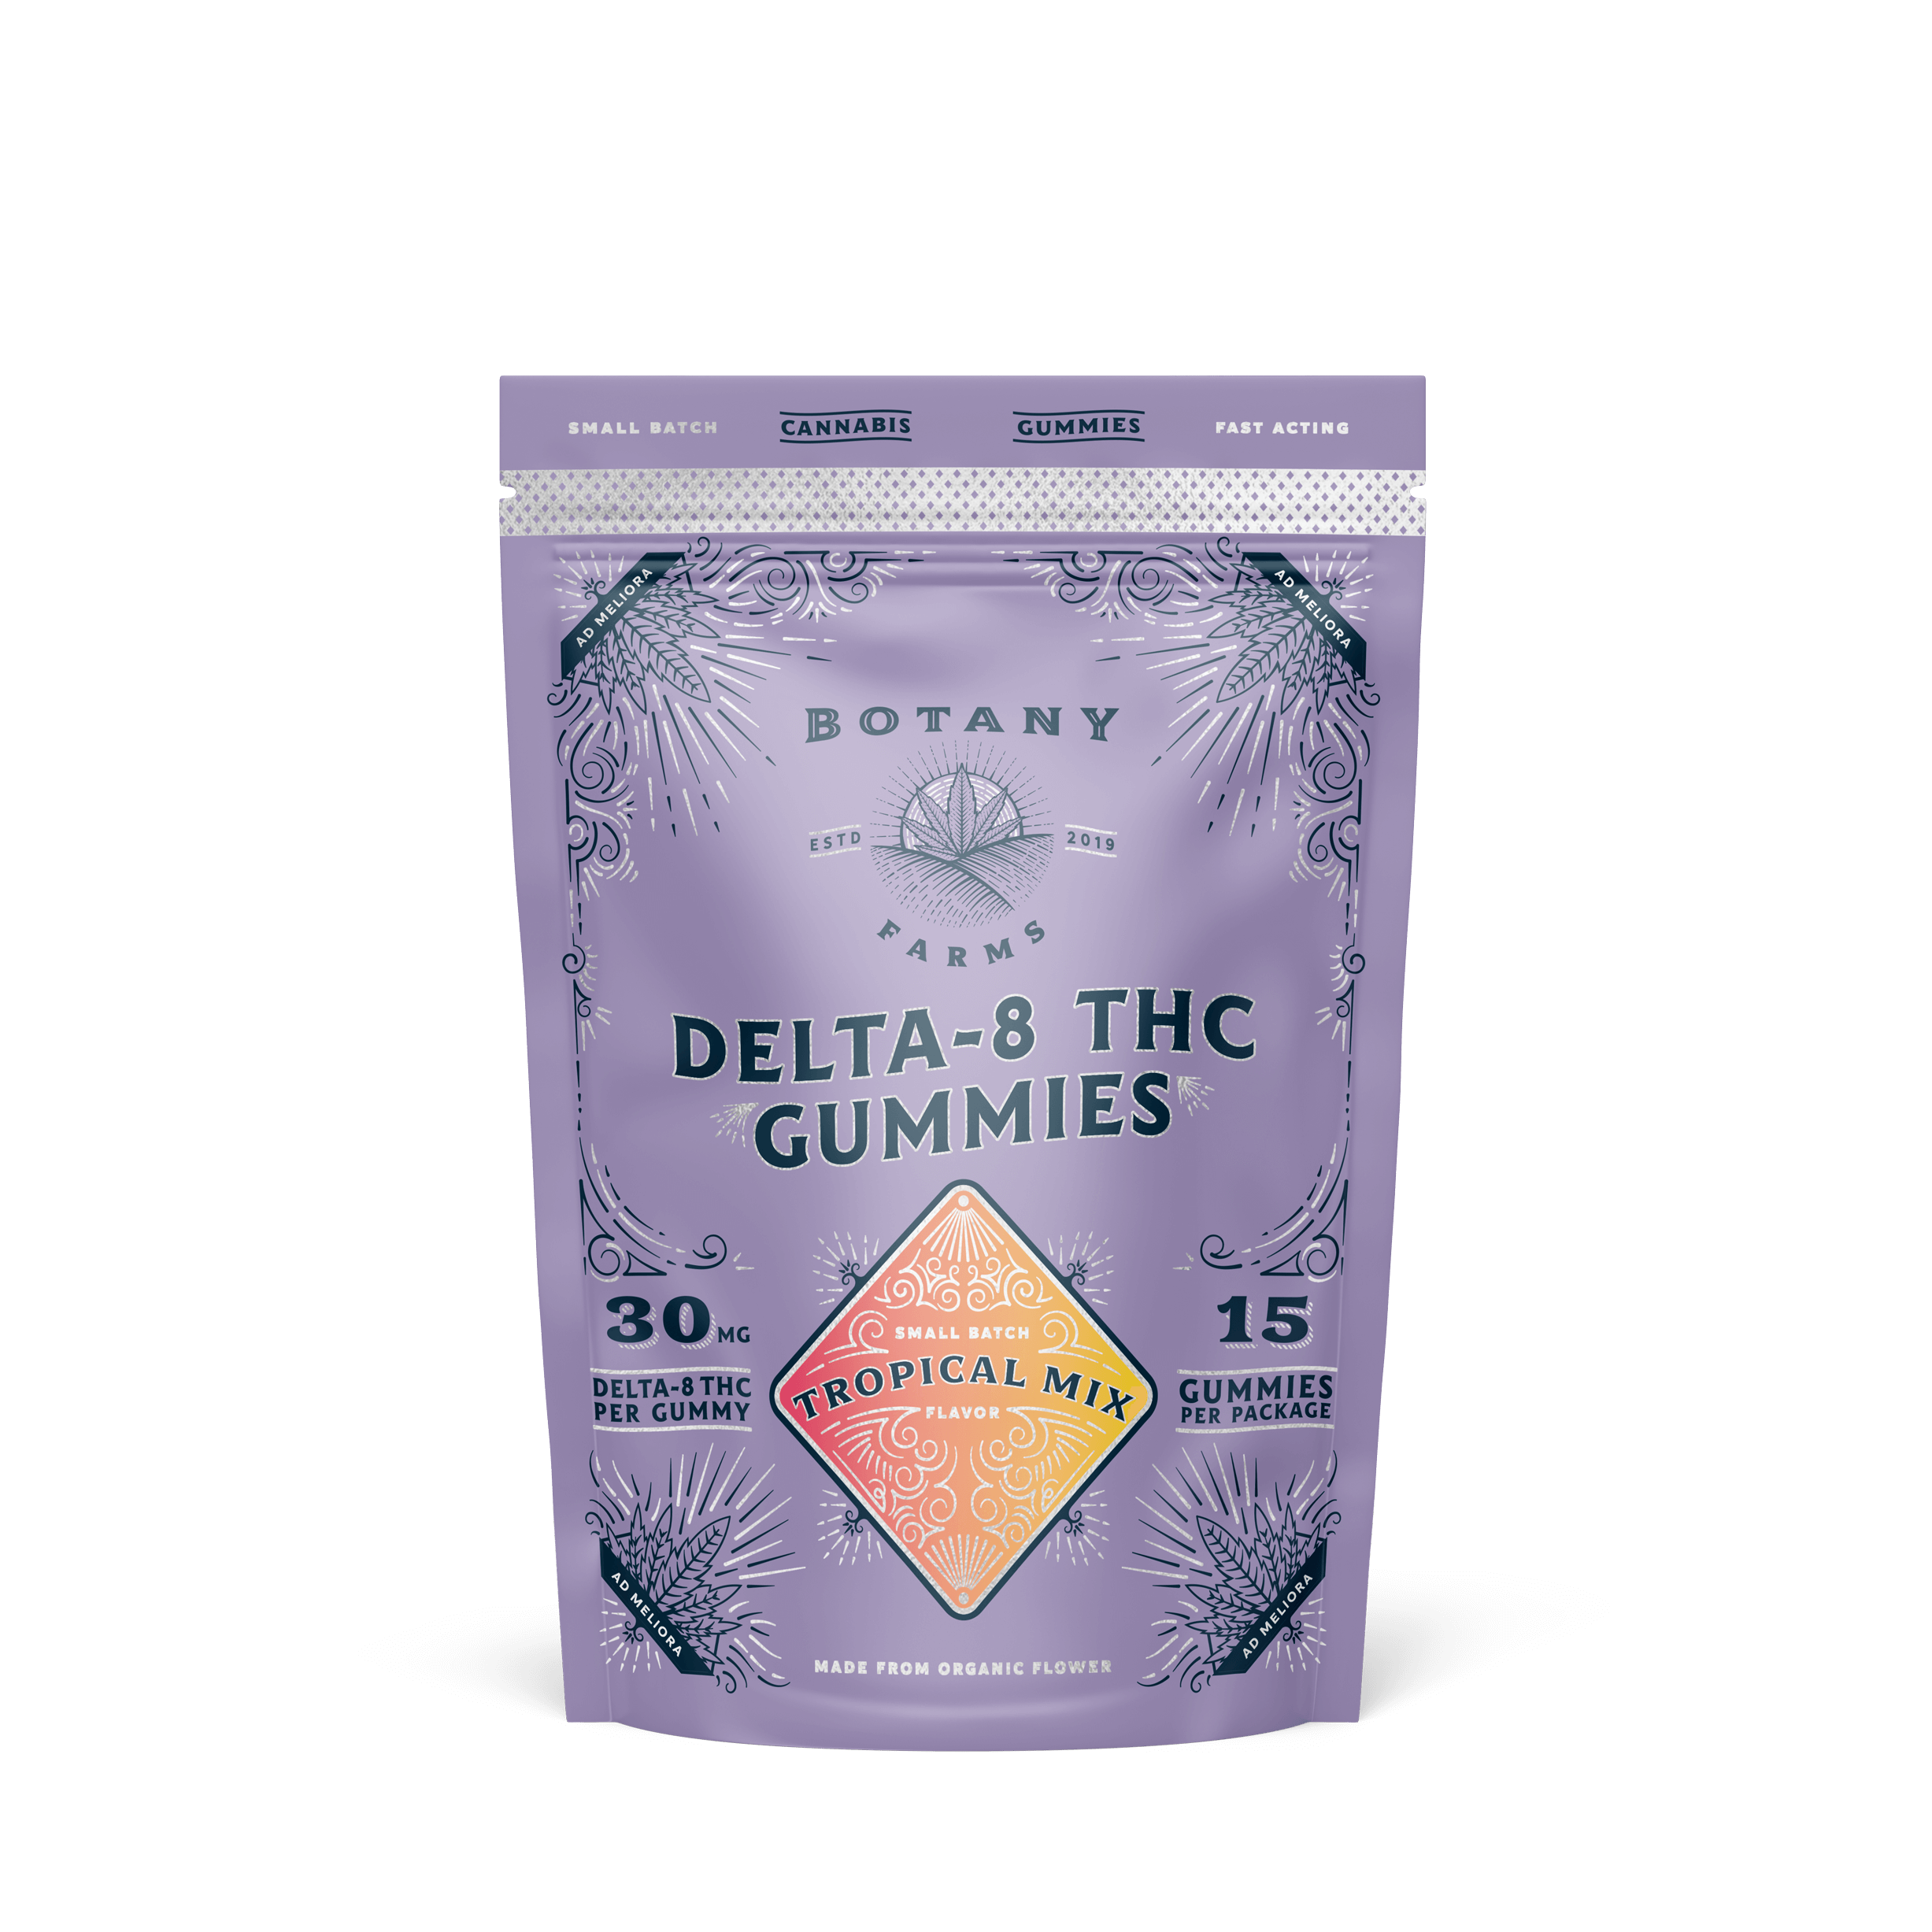 Tropical Mix Delta-8 THC Gummies: 15 Pack from Botany Farms